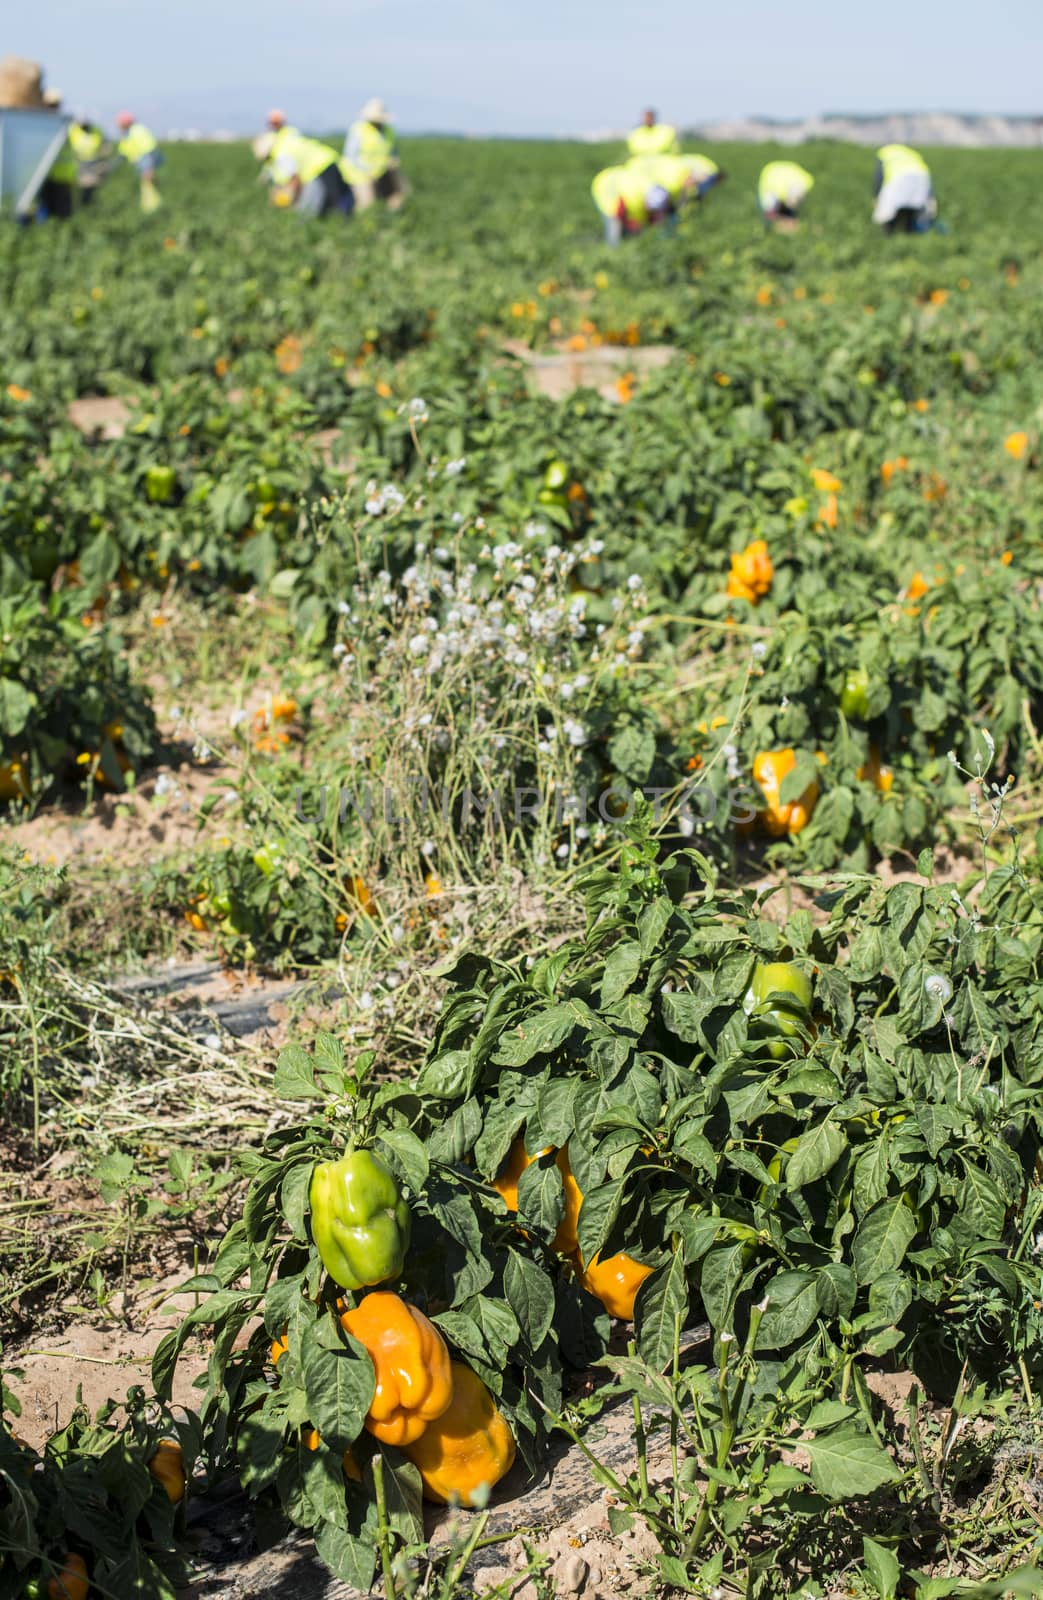 Picking peppers on agriculture field by deyan_georgiev